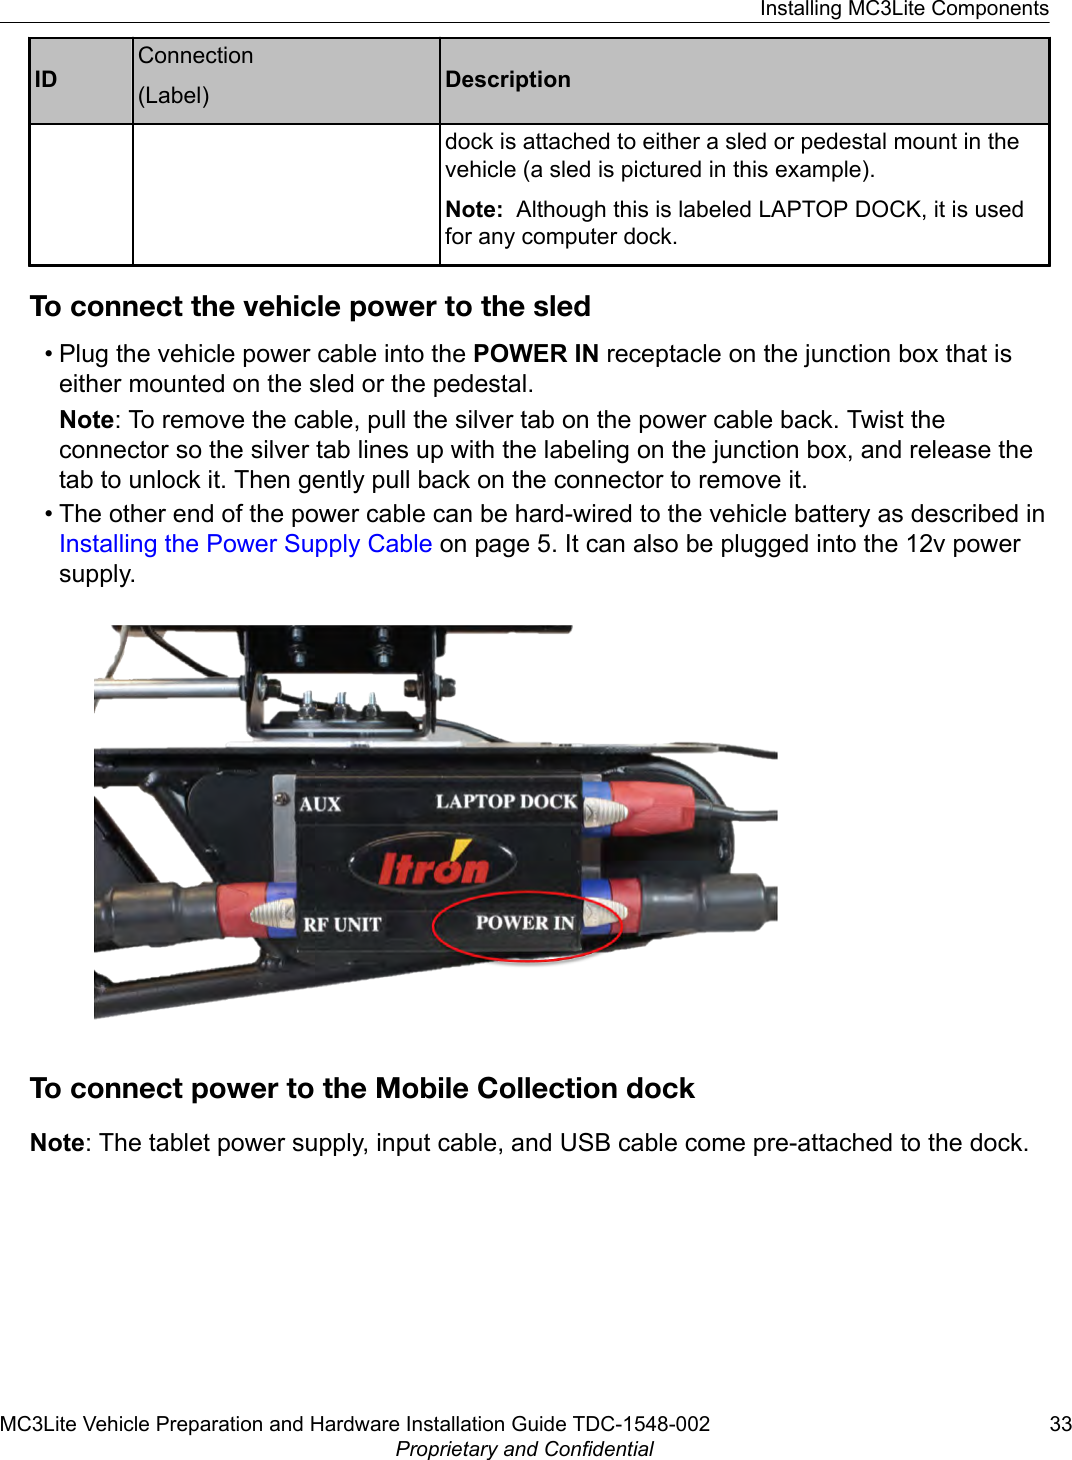 IDConnection(Label) Descriptiondock is attached to either a sled or pedestal mount in thevehicle (a sled is pictured in this example).Note:  Although this is labeled LAPTOP DOCK, it is usedfor any computer dock.To connect the vehicle power to the sled• Plug the vehicle power cable into the POWER IN receptacle on the junction box that iseither mounted on the sled or the pedestal.Note: To remove the cable, pull the silver tab on the power cable back. Twist theconnector so the silver tab lines up with the labeling on the junction box, and release thetab to unlock it. Then gently pull back on the connector to remove it.• The other end of the power cable can be hard-wired to the vehicle battery as described in Installing the Power Supply Cable on page 5. It can also be plugged into the 12v powersupply.To connect power to the Mobile Collection dockNote: The tablet power supply, input cable, and USB cable come pre-attached to the dock.Installing MC3Lite ComponentsMC3Lite Vehicle Preparation and Hardware Installation Guide TDC-1548-002 33Proprietary and Confidential